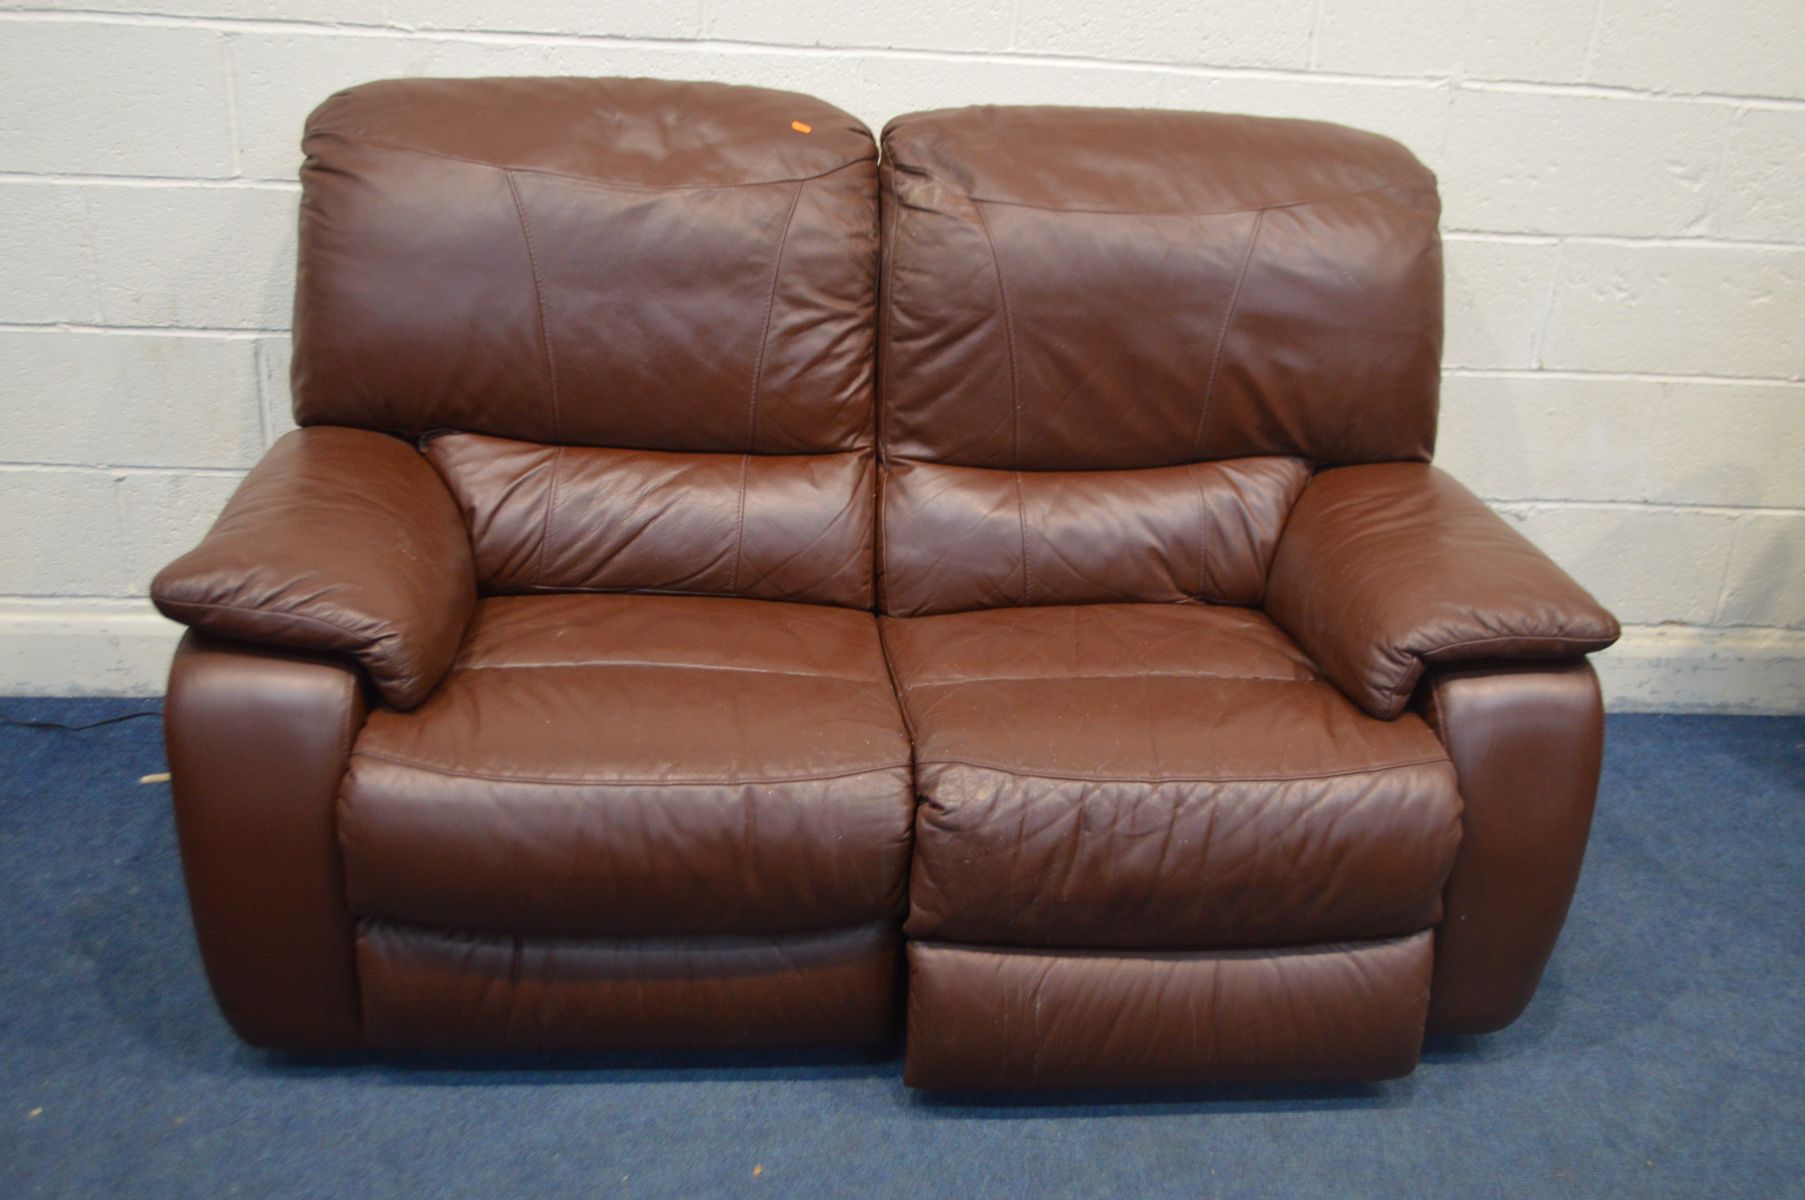 A BURGUNDY LEATHER TWO SEATER ELECTRIC RECLINING SOFA, width 166cm and an ottoman pouffe (PAT pass